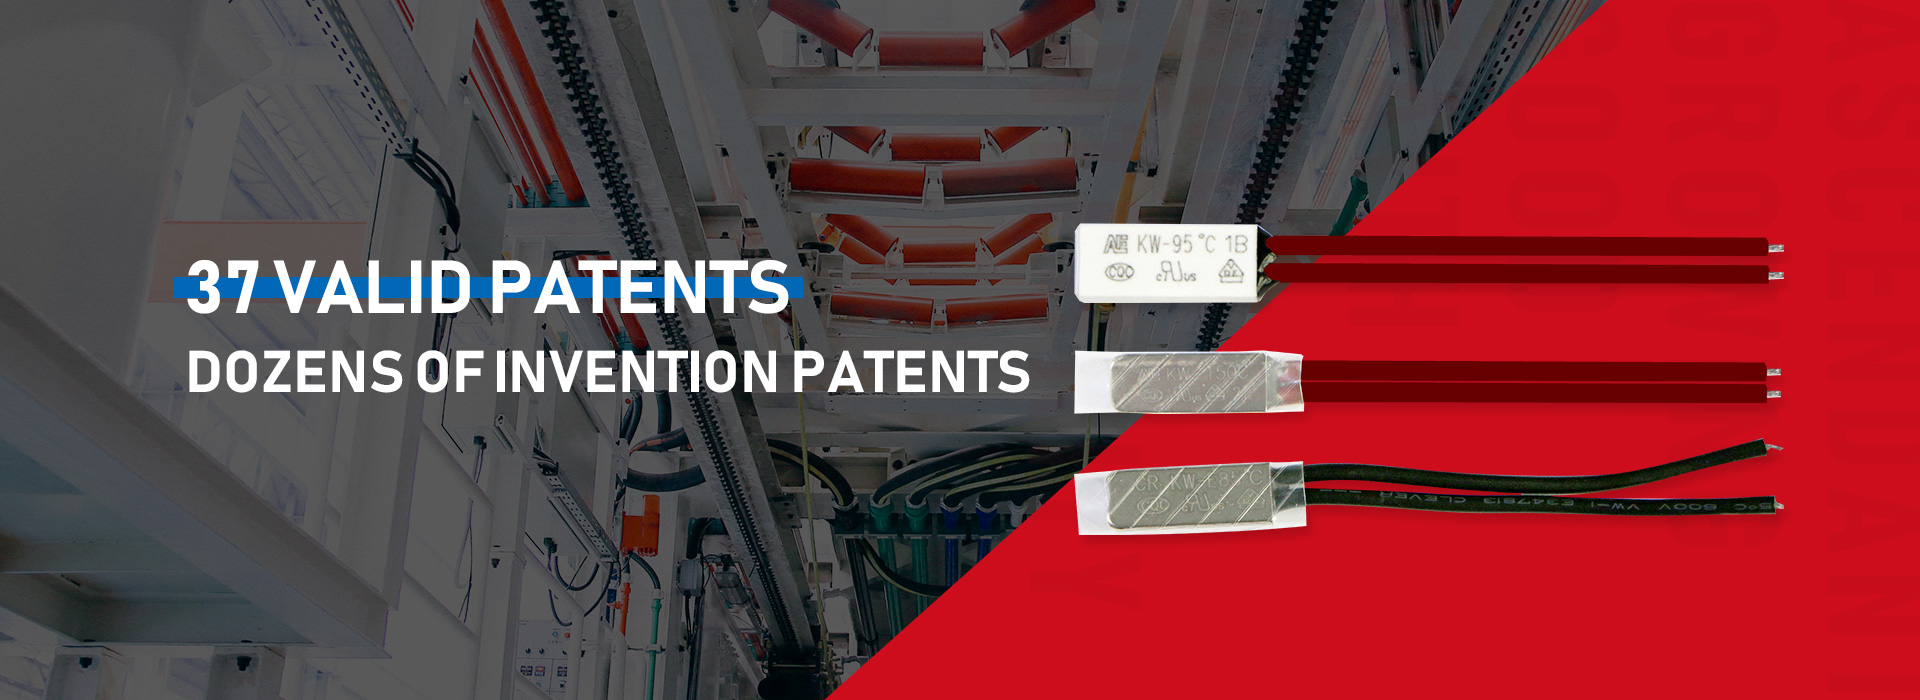 At present,  it has 37 valid patents  and  dozens of invention patents